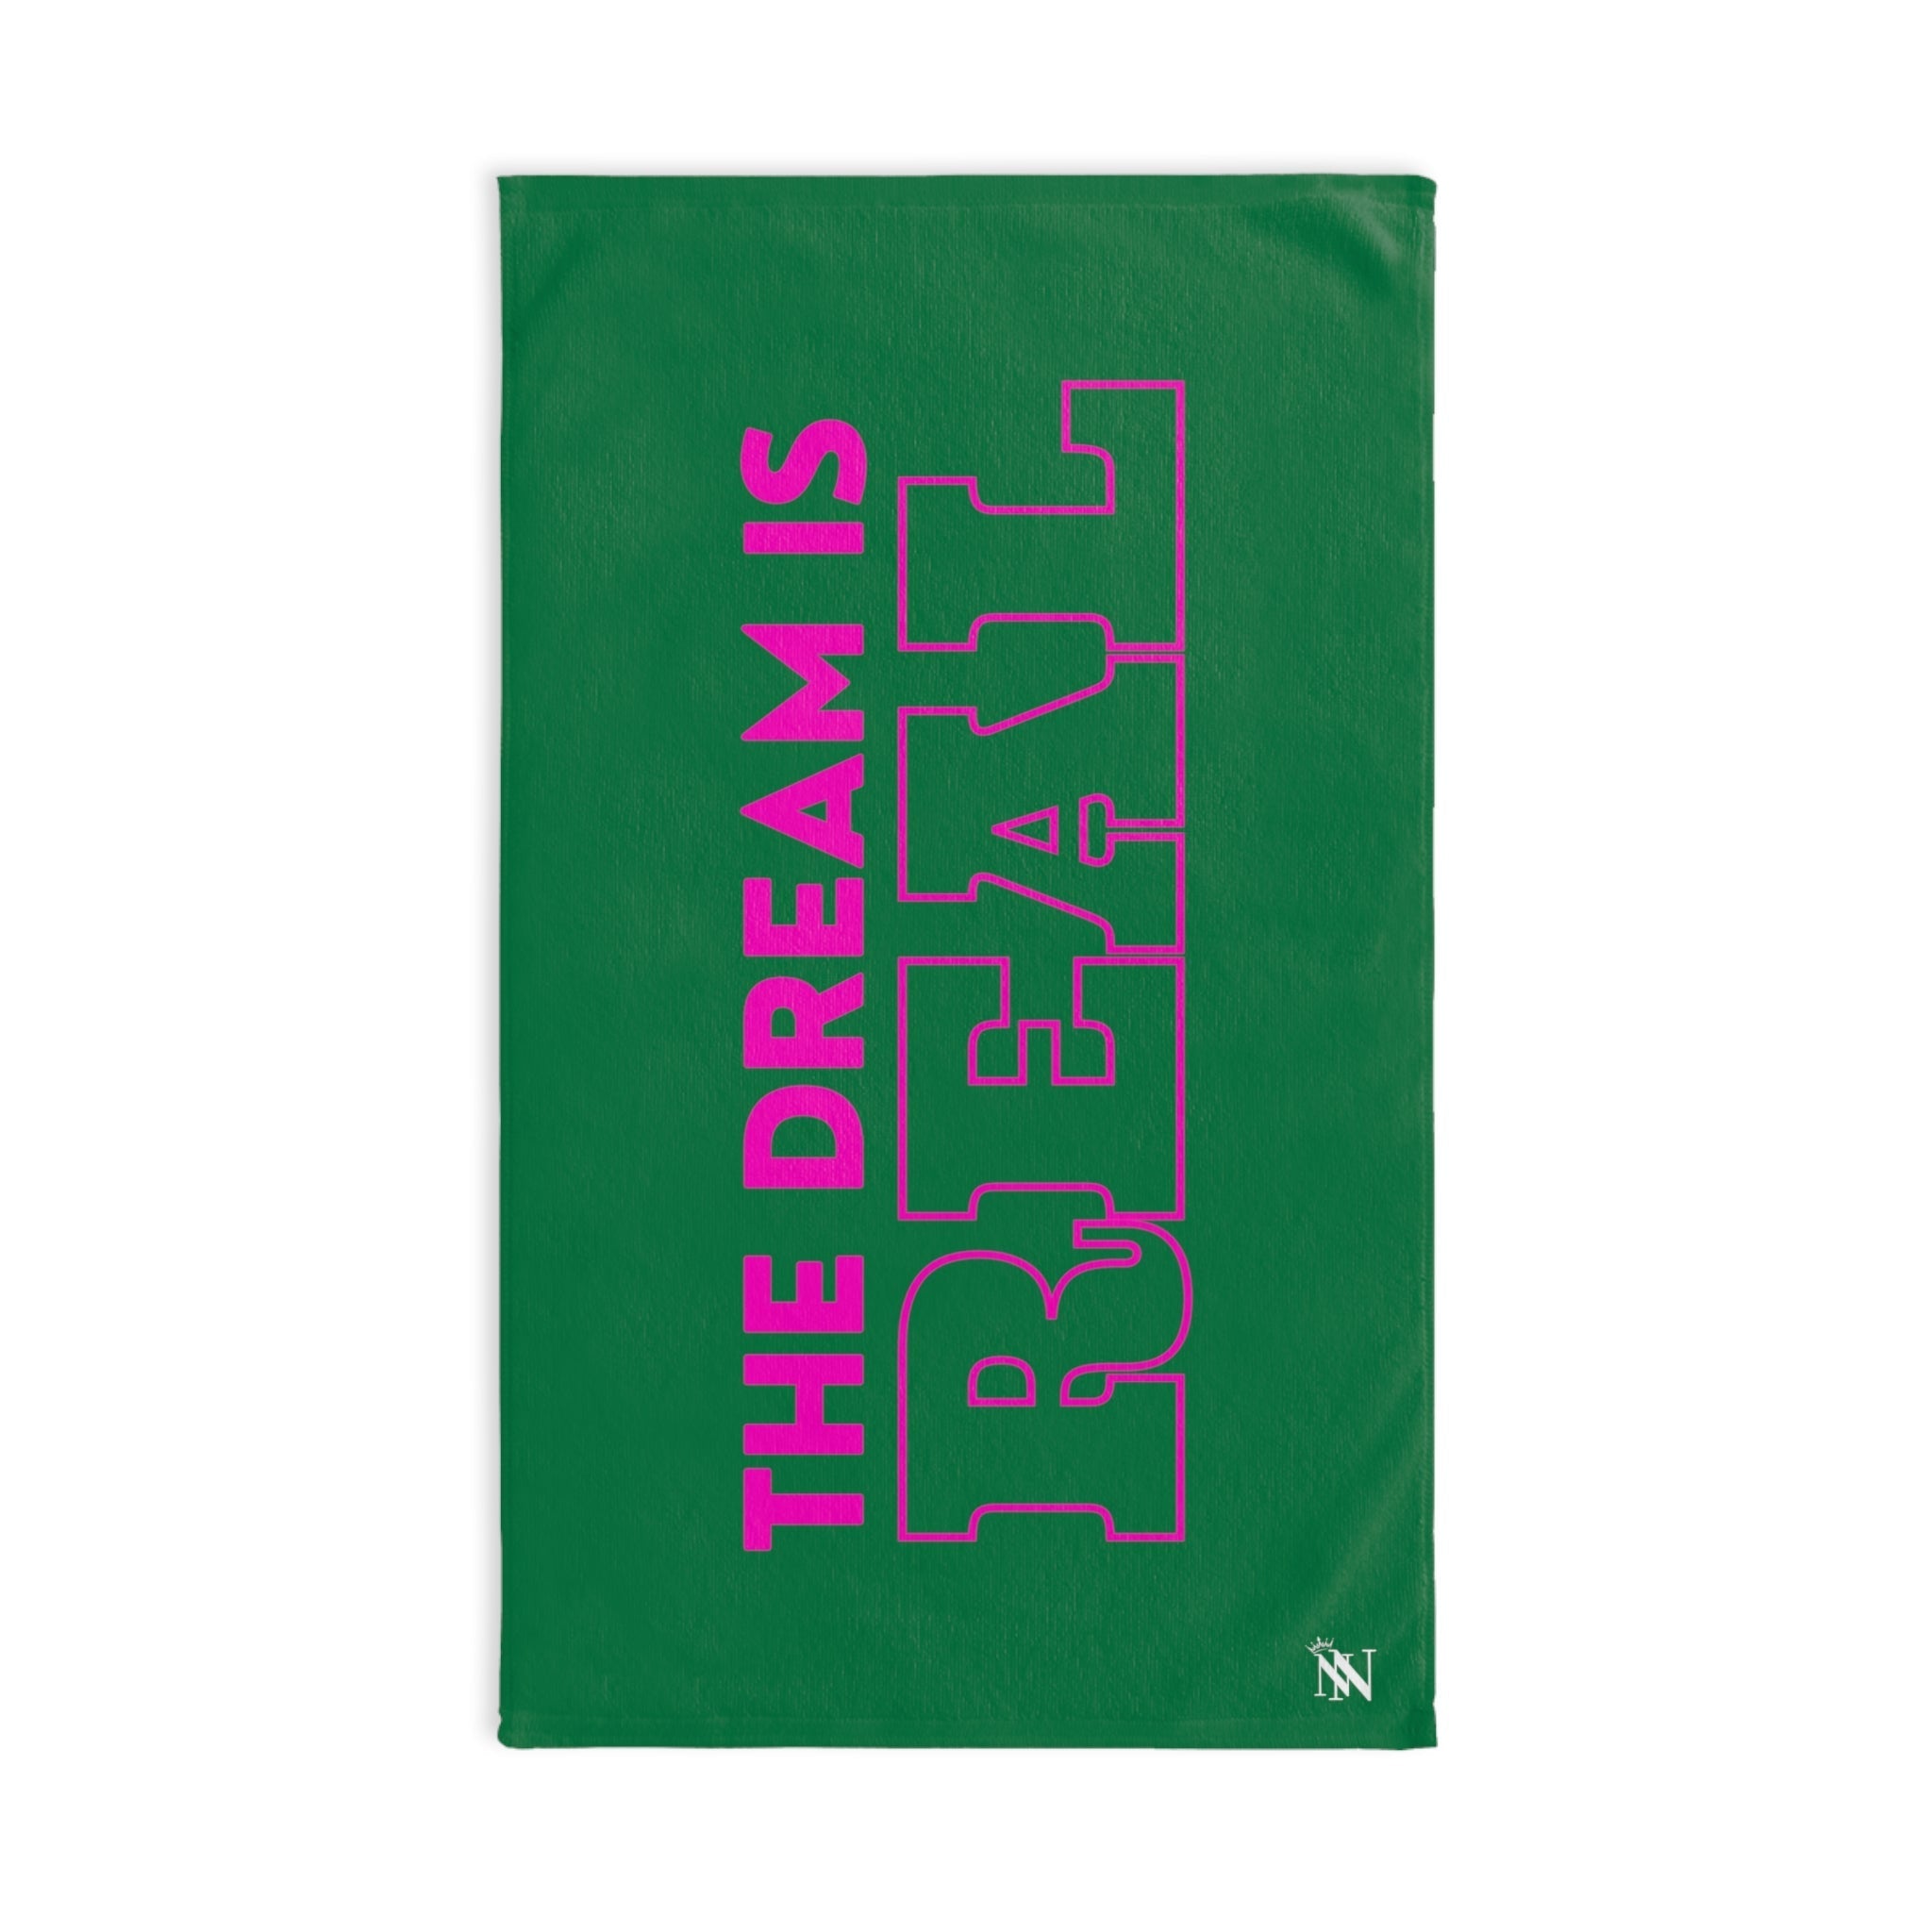 Dream Big Pink Green | Anniversary Wedding, Christmas, Valentines Day, Birthday Gifts for Him, Her, Romantic Gifts for Wife, Girlfriend, Couples Gifts for Boyfriend, Husband NECTAR NAPKINS